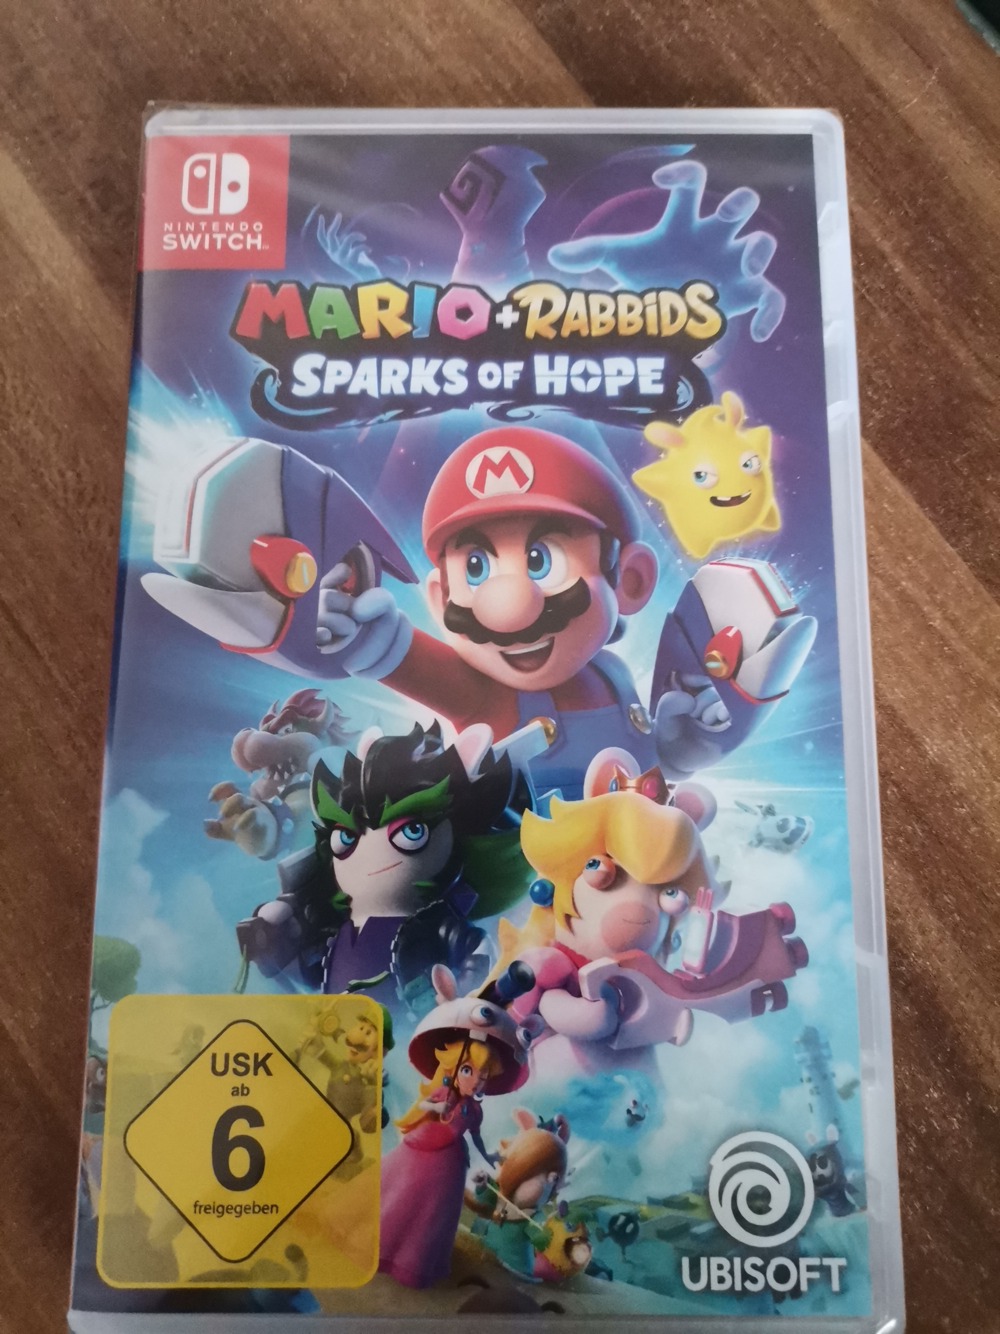 Mario+Rabbids - Sparks of hope